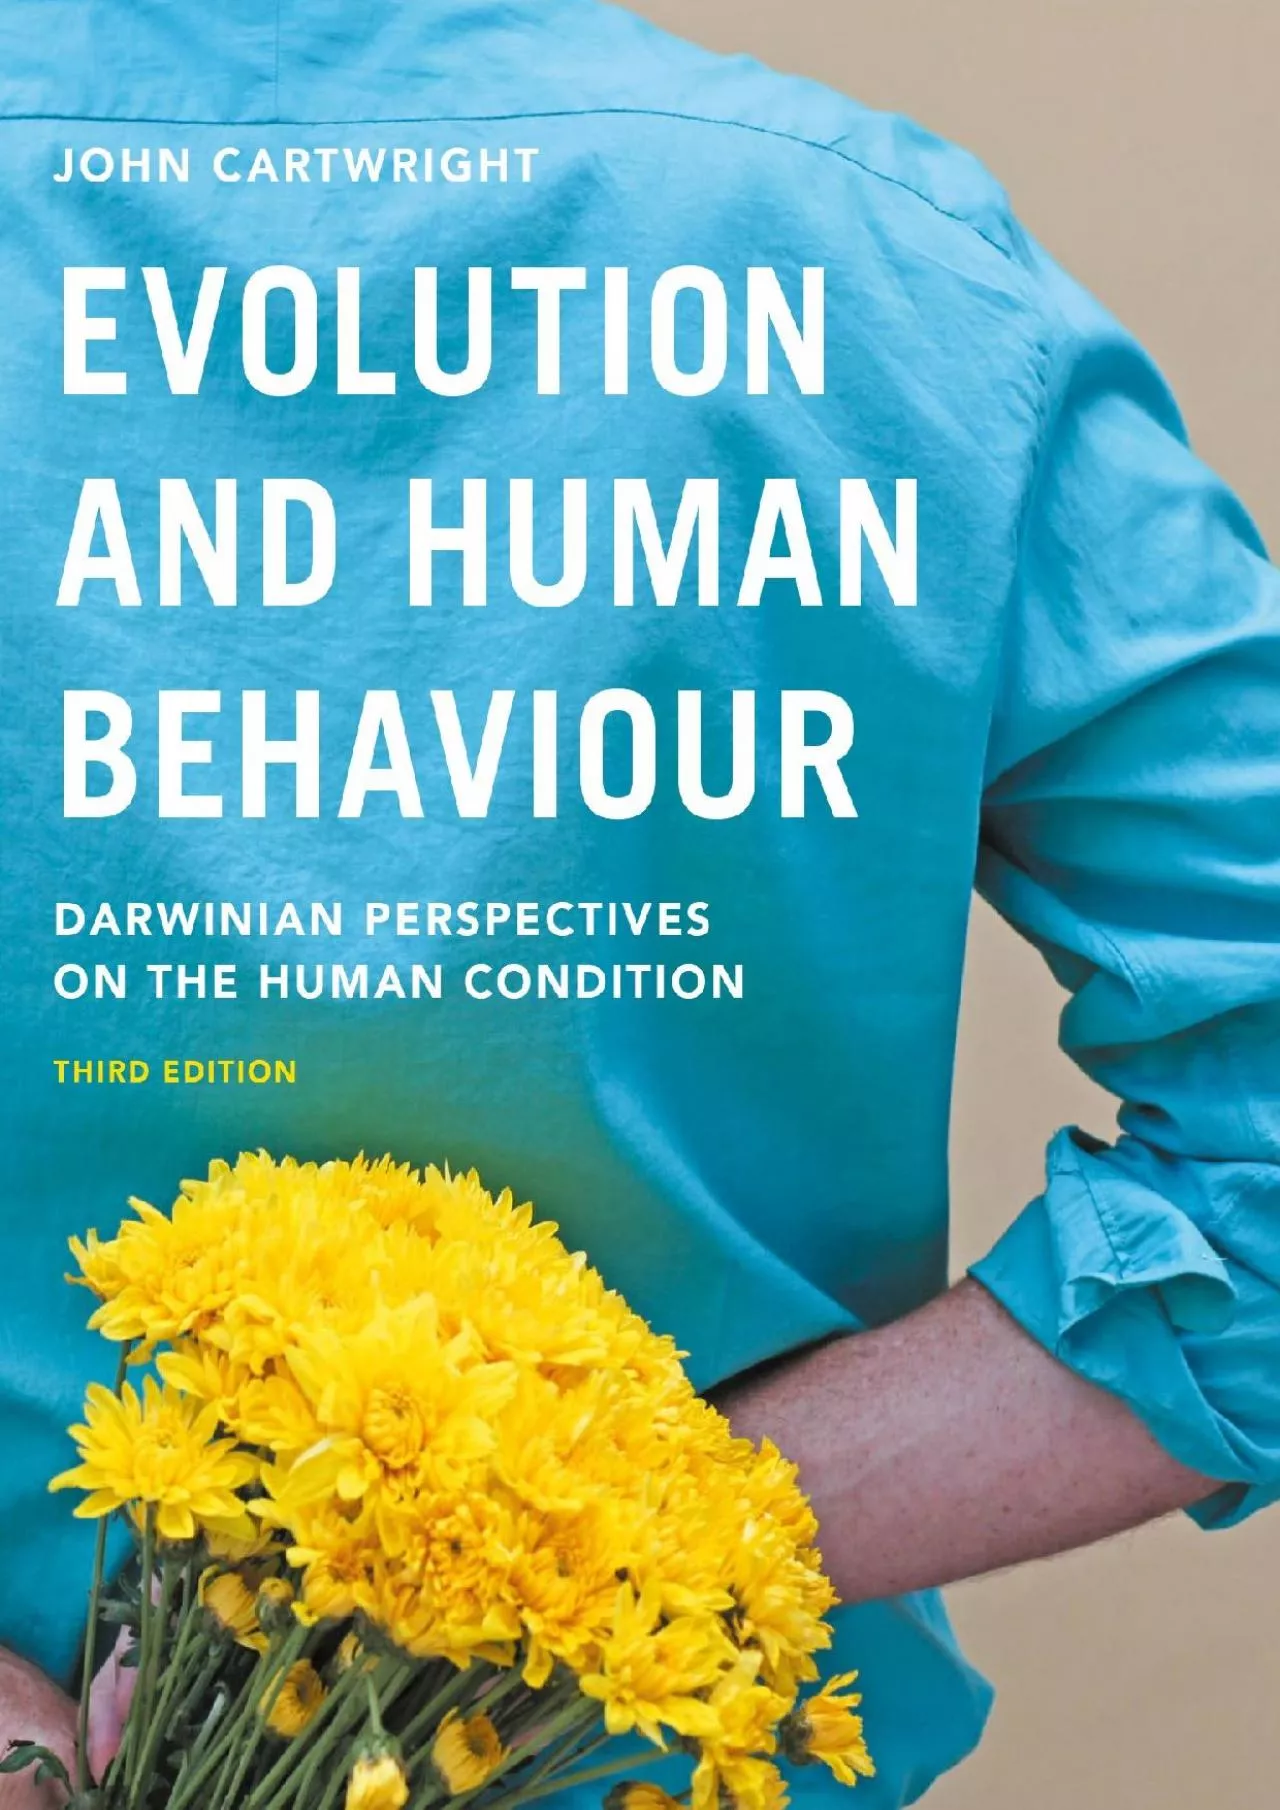 (EBOOK)-Evolution and Human Behaviour: Darwinian Perspectives on the Human Condition